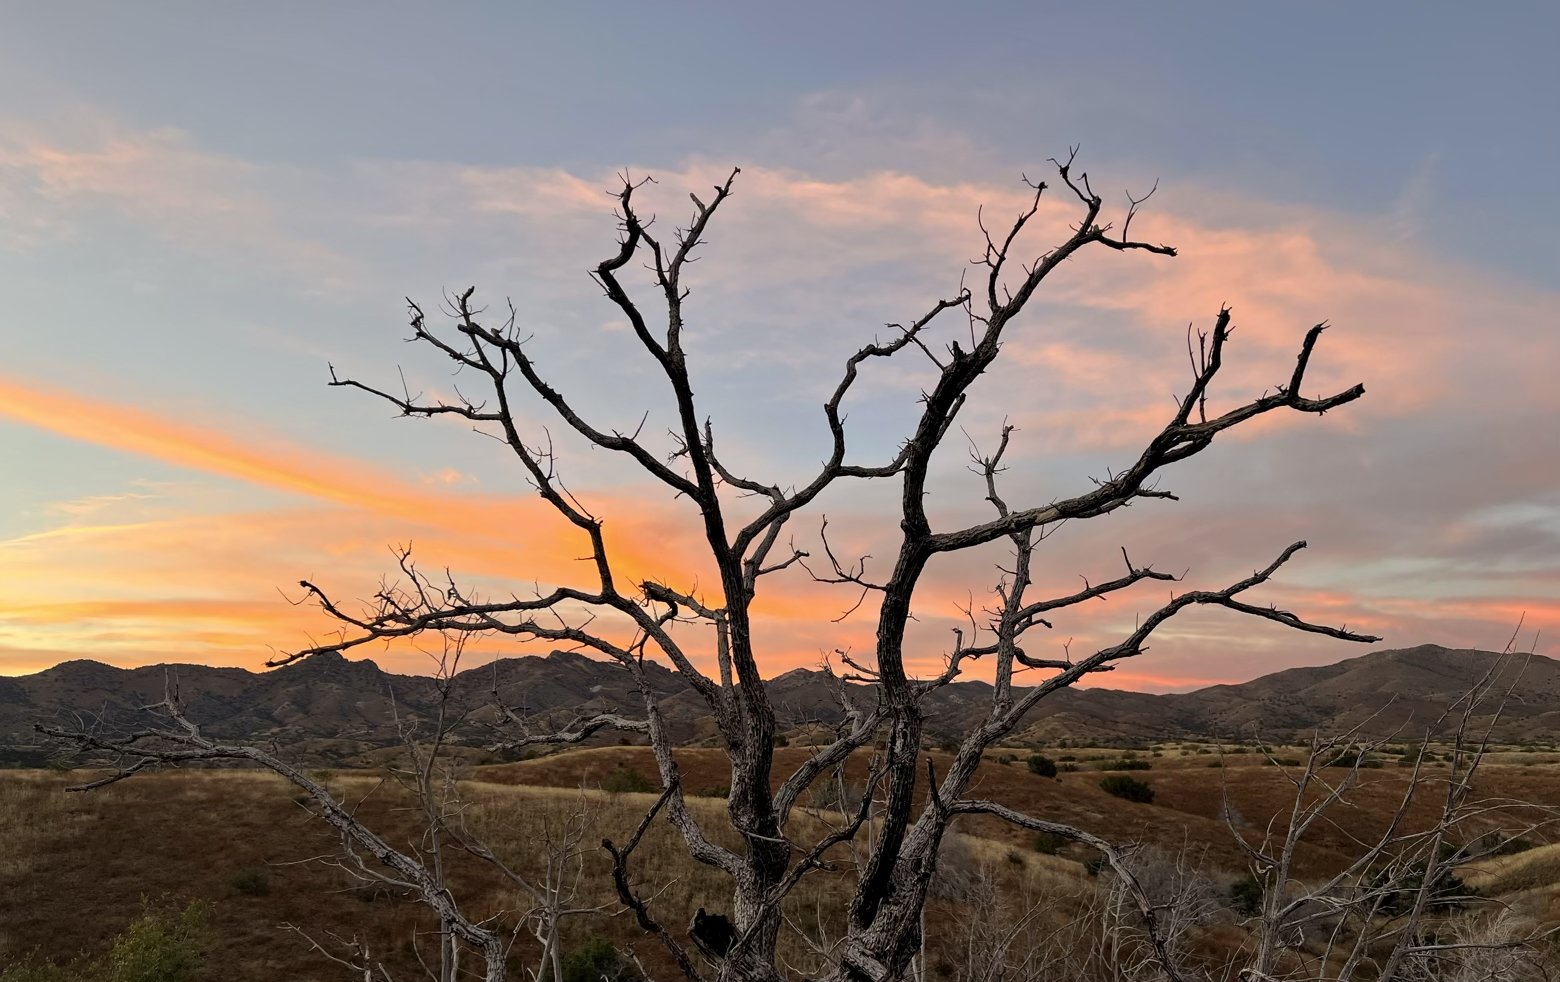 Dead tree chandelier at sunset